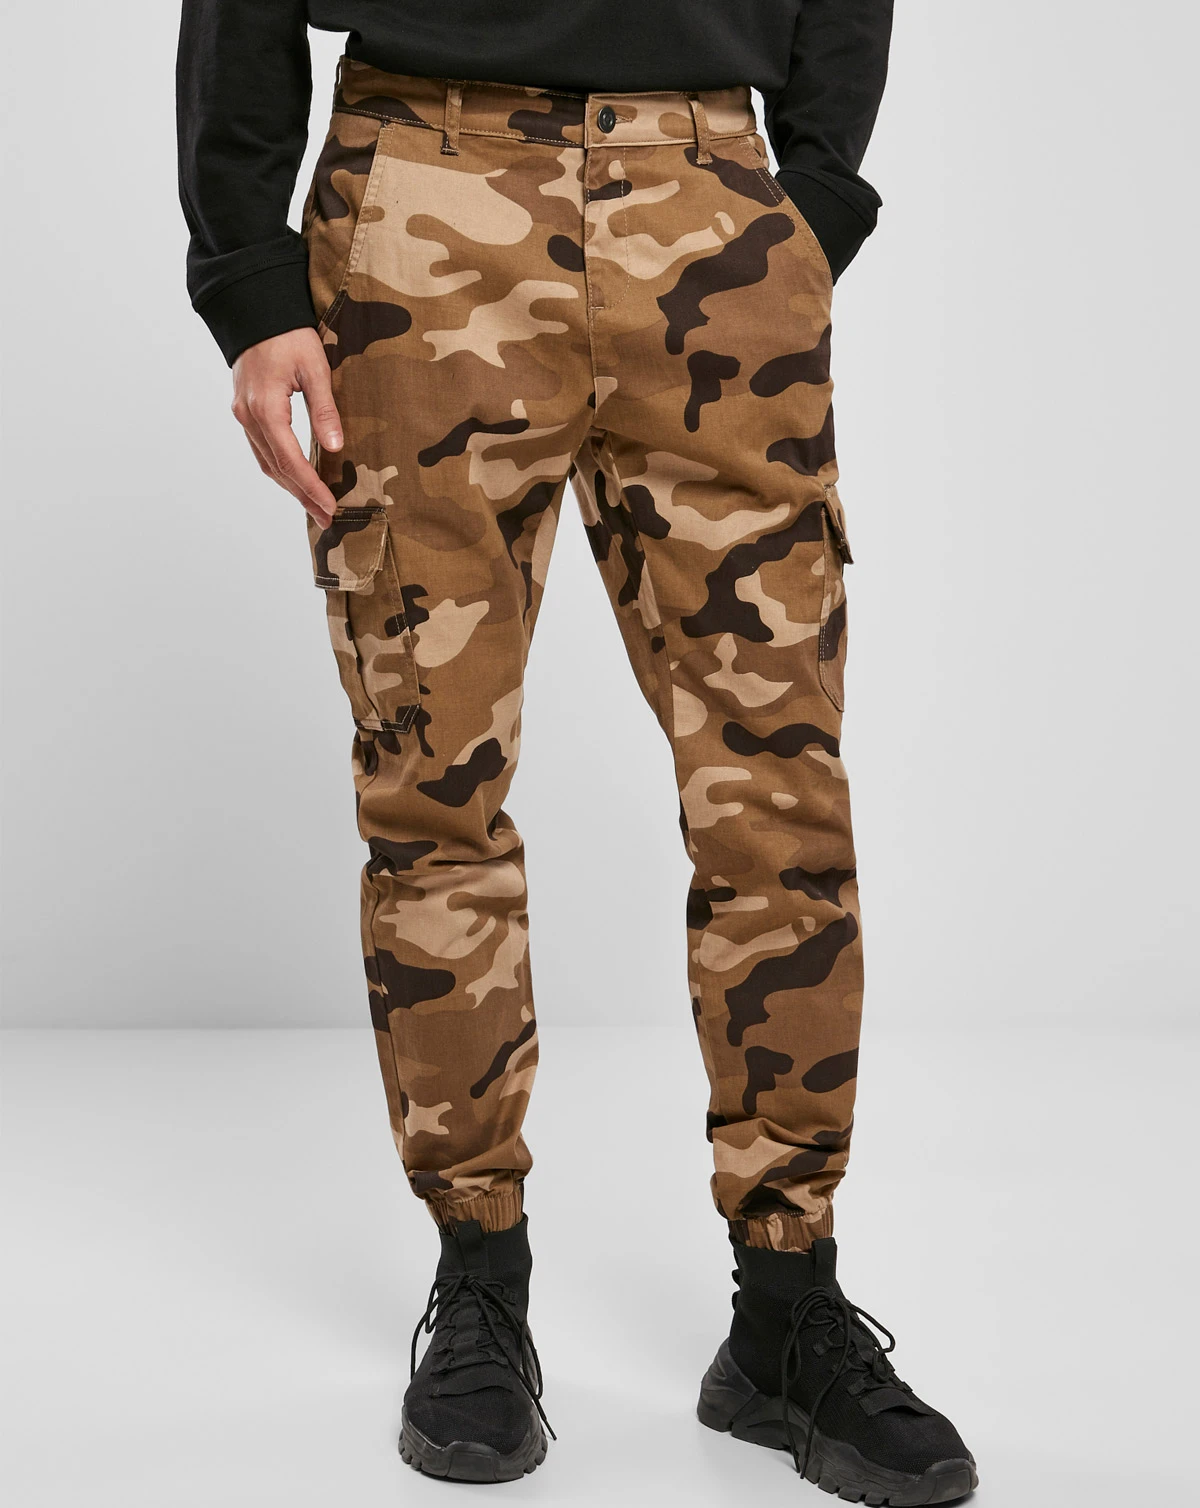  SKYLINEWEARS Men's Casual Military Army Cargo Pants Camo  Trousers 2803 Black 30-30 : Clothing, Shoes & Jewelry